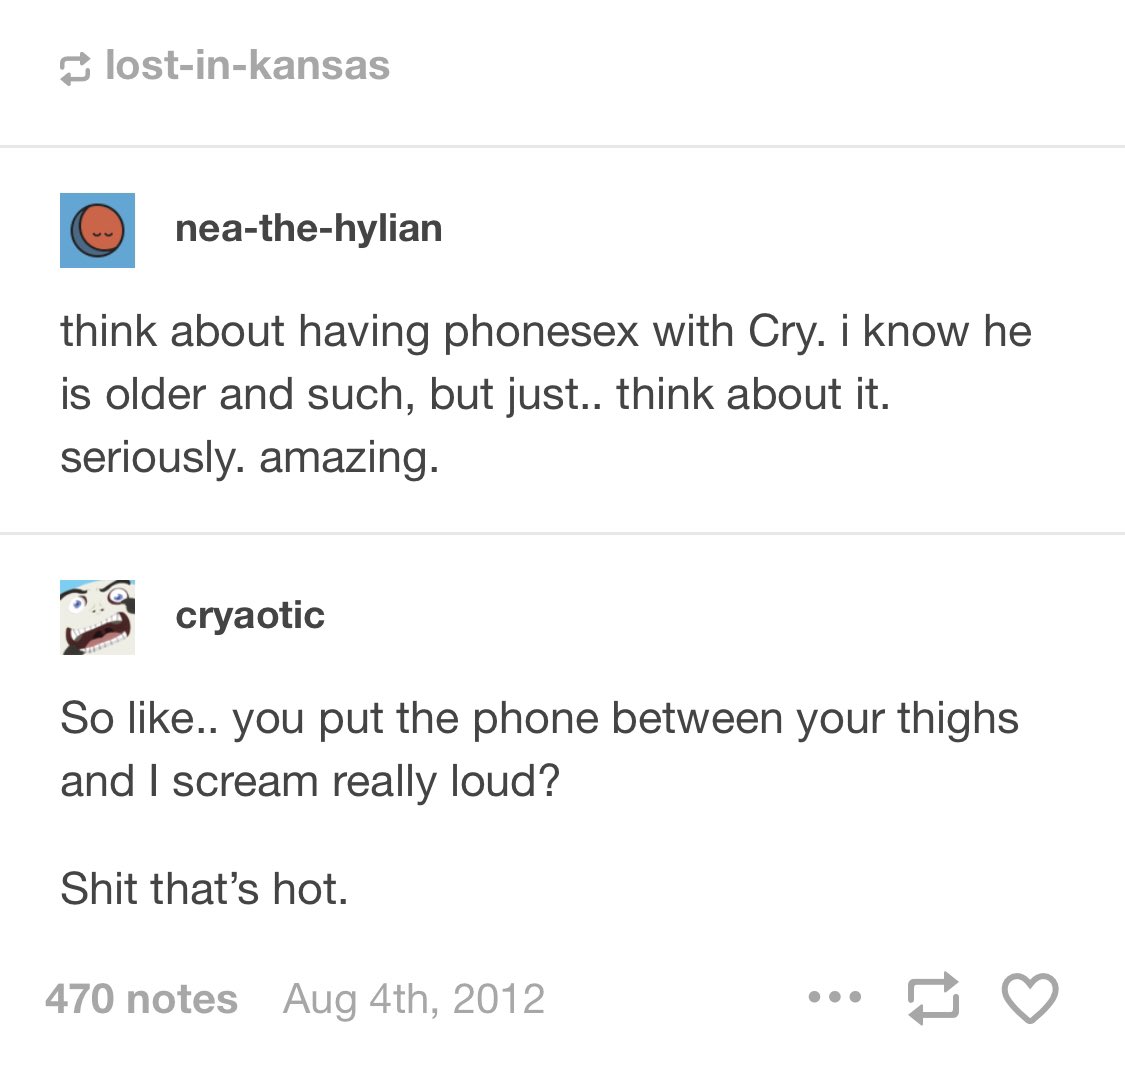 CW: more old cryaotic tumblr posts where he is explicit for no reasonthe first picture ryan terry is playing with the idea of being inappropriate with a fan (idk if they were a minor at this time, but looking at how they’ve interacted before and cry says she’s 15, i think)